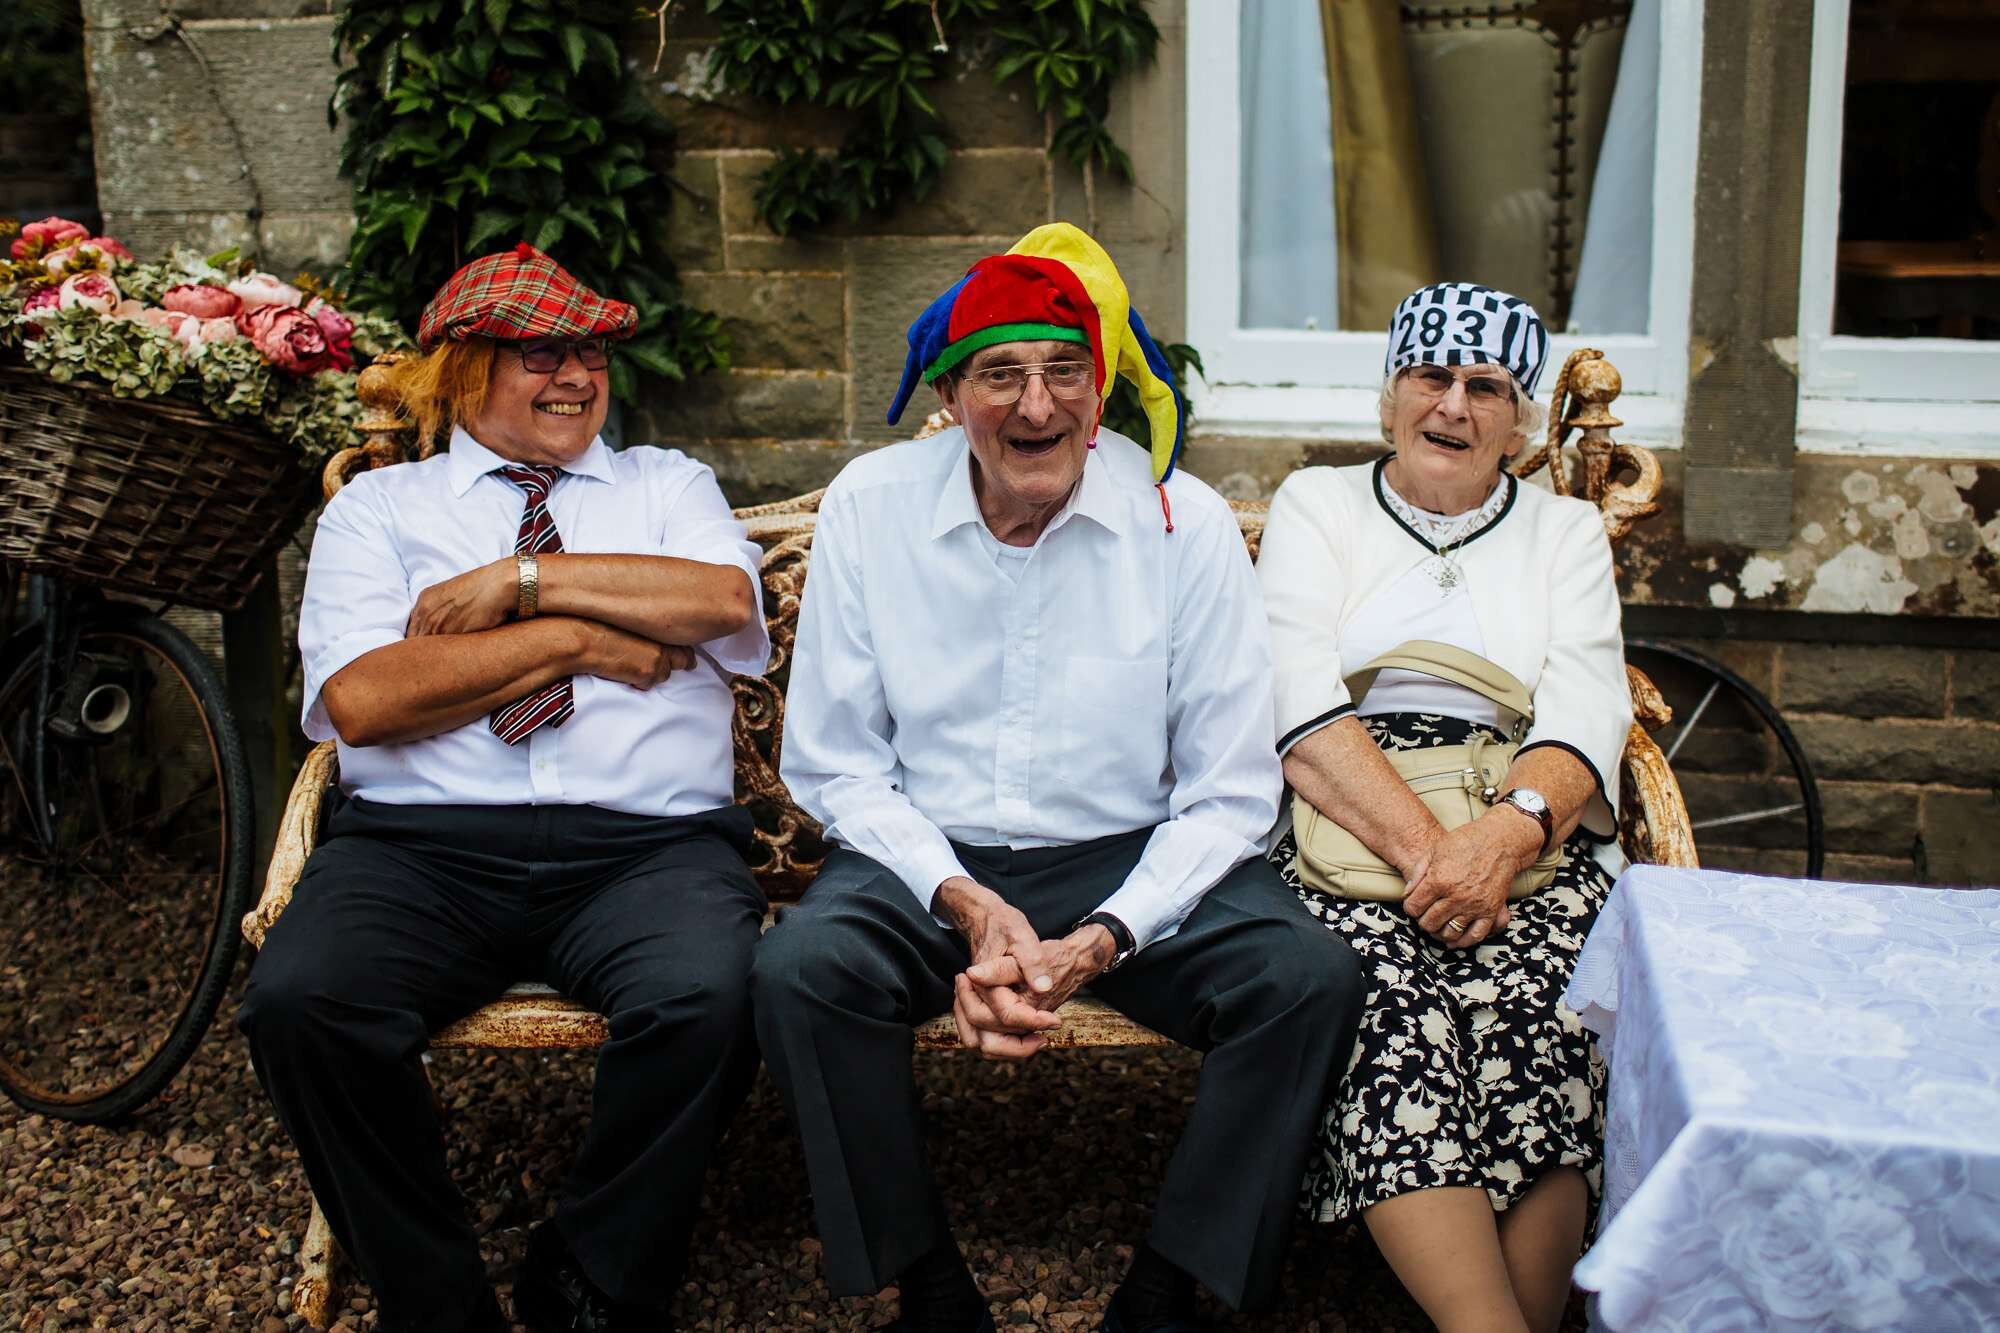 Pensioners in funny hats at a wedding